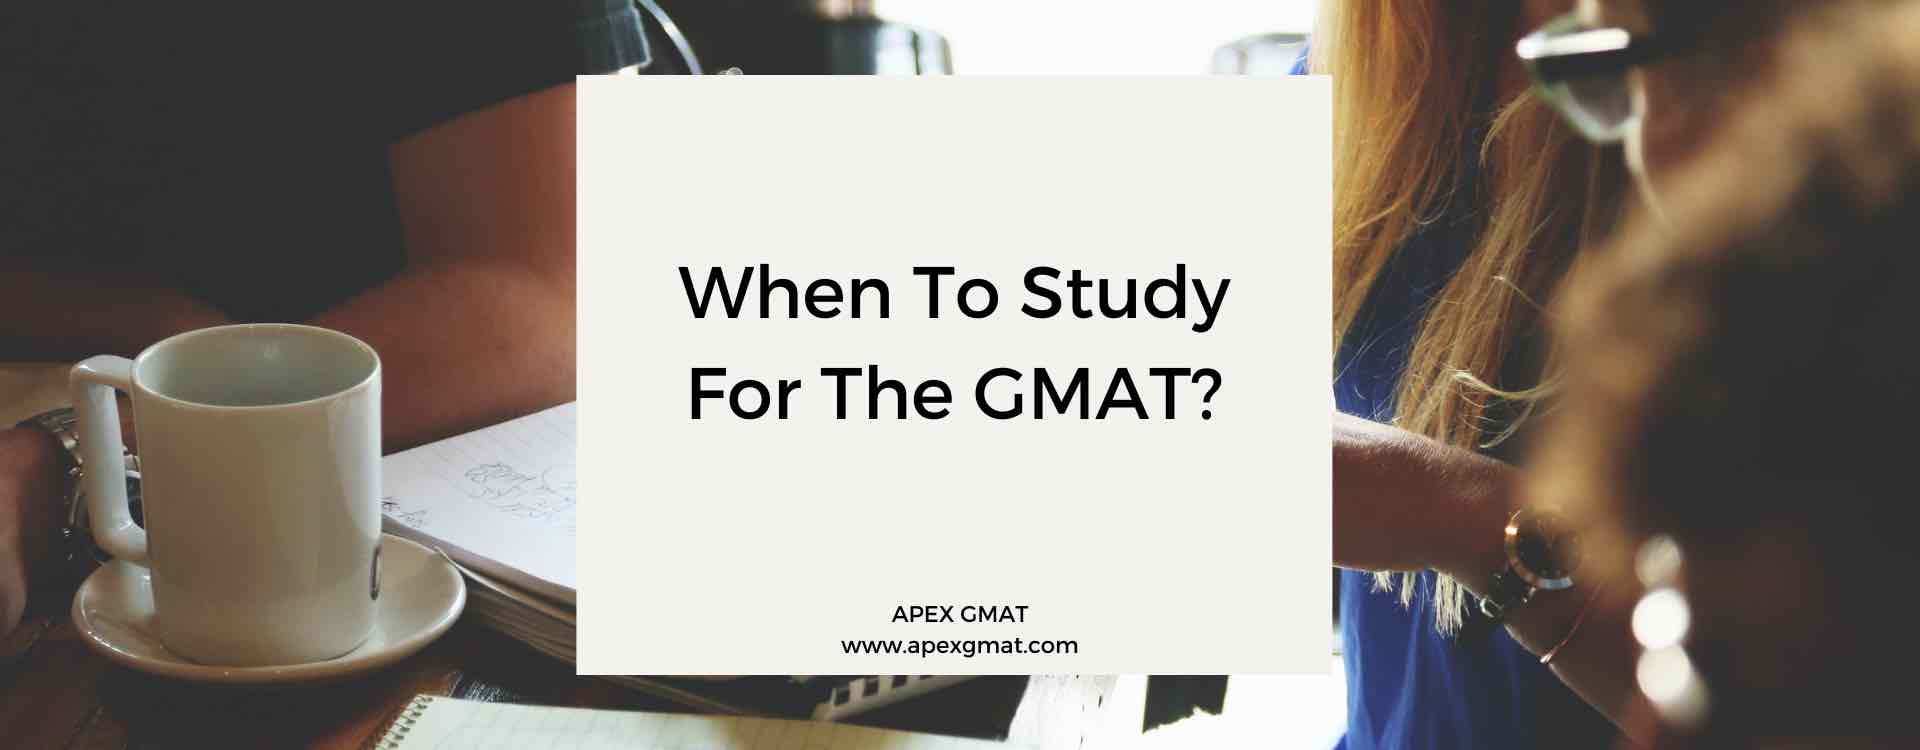 When to study for the GMAT